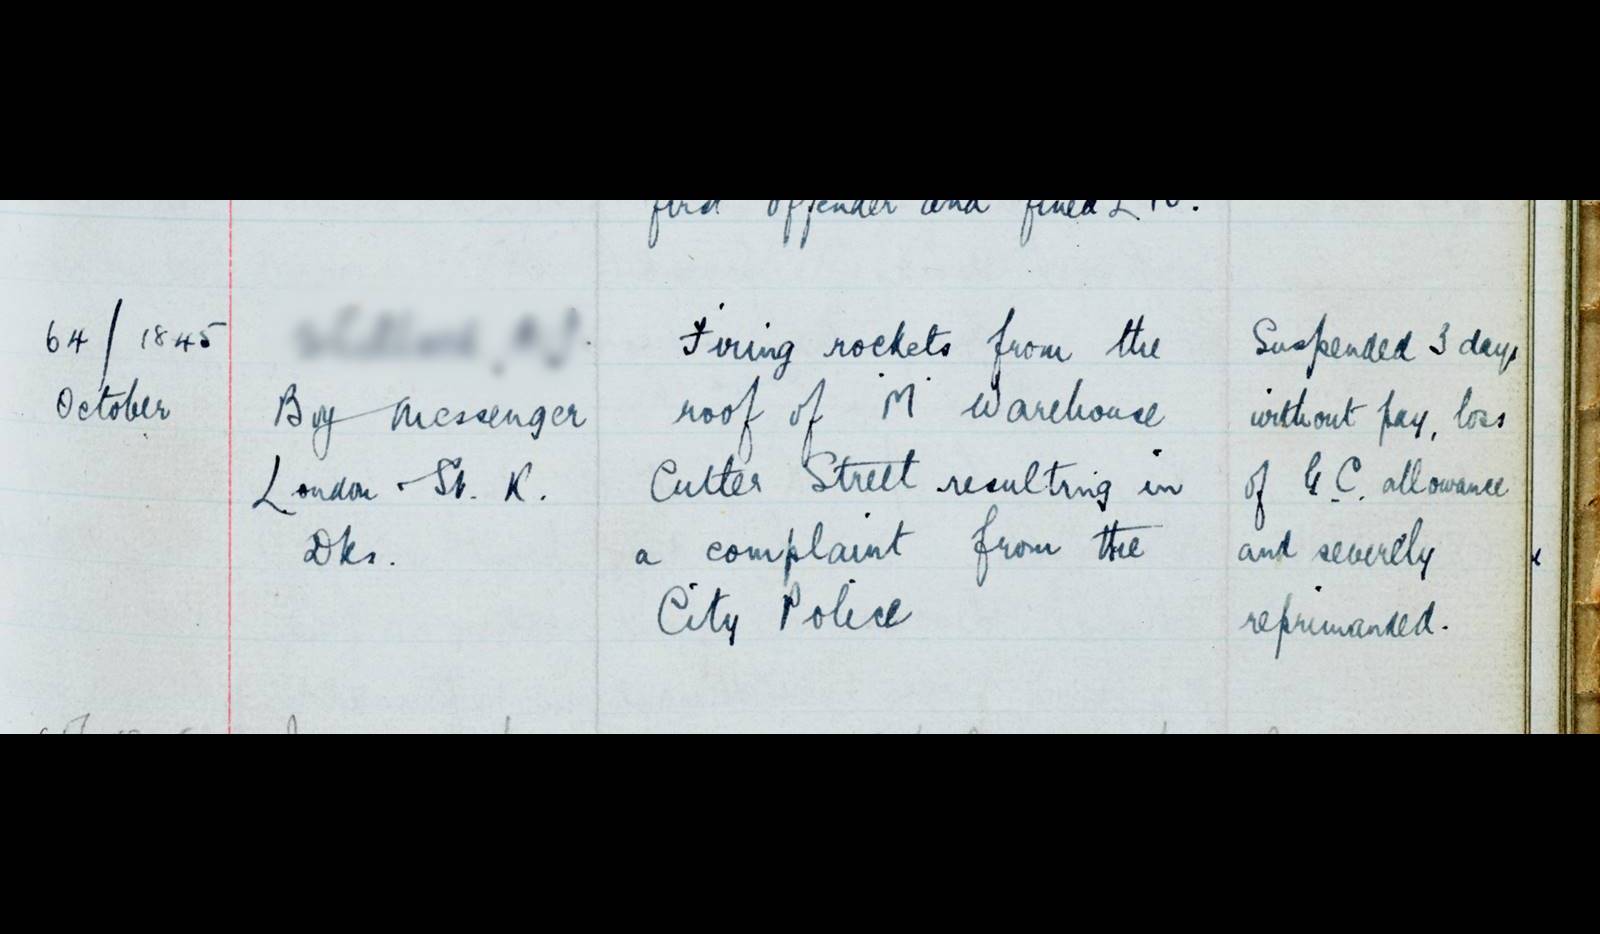 In this July 1903 entry, the person assaulted a hydraulic man and visited the Gallions Hotel during duty hours. He was cautioned, fined and warned. (ID no.: PLA/LIDJC/4/2/1/2)